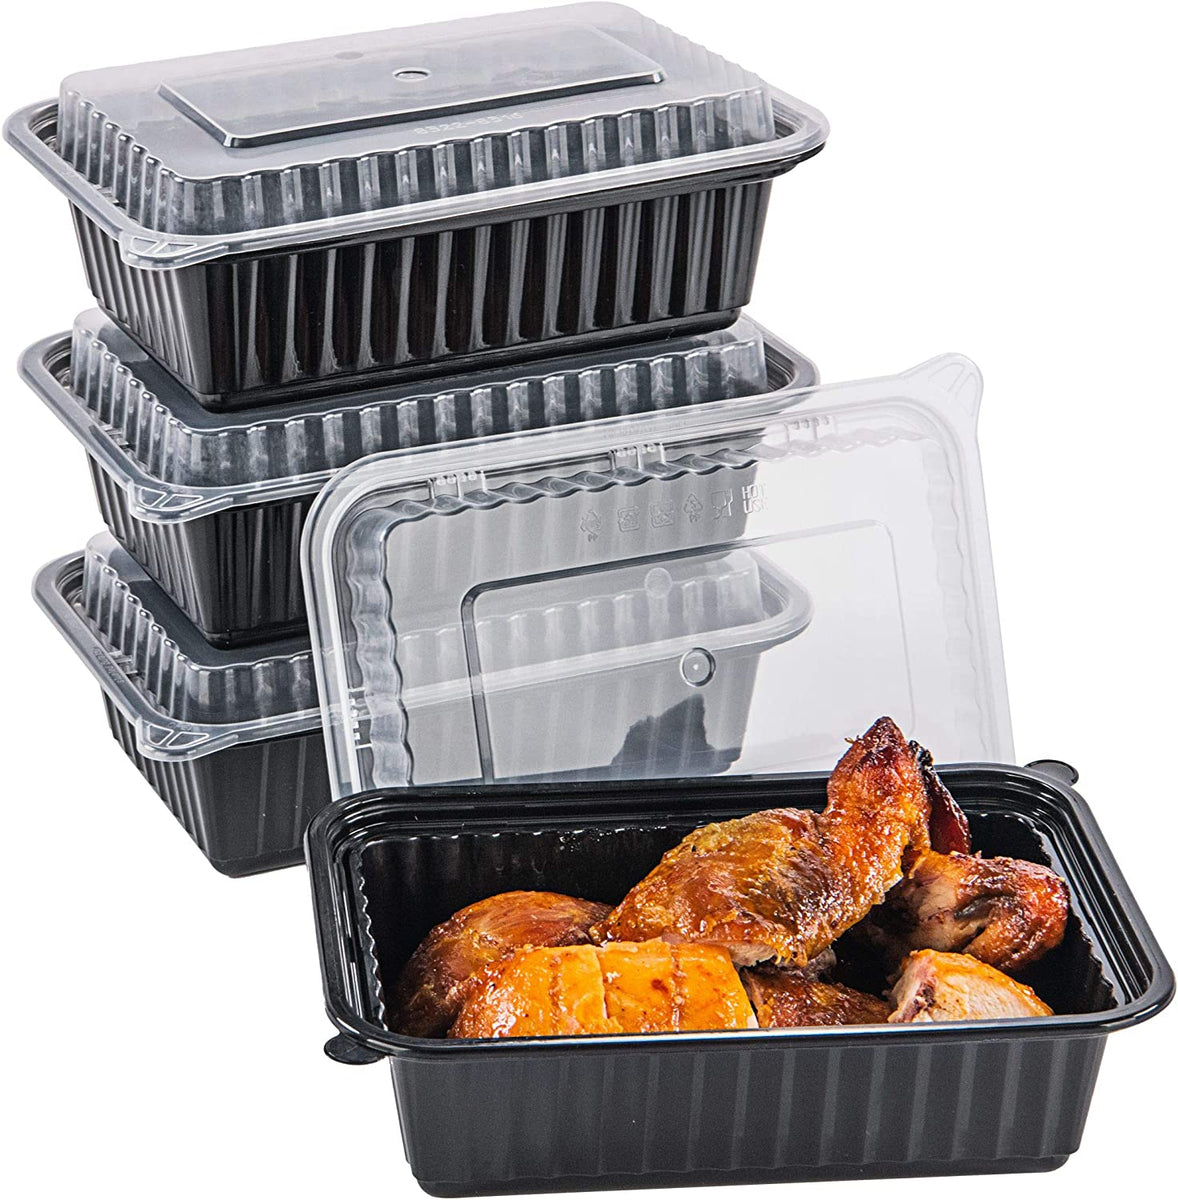 CTC-006] 1 Compartment Rectangular Meal Prep Container with Lids